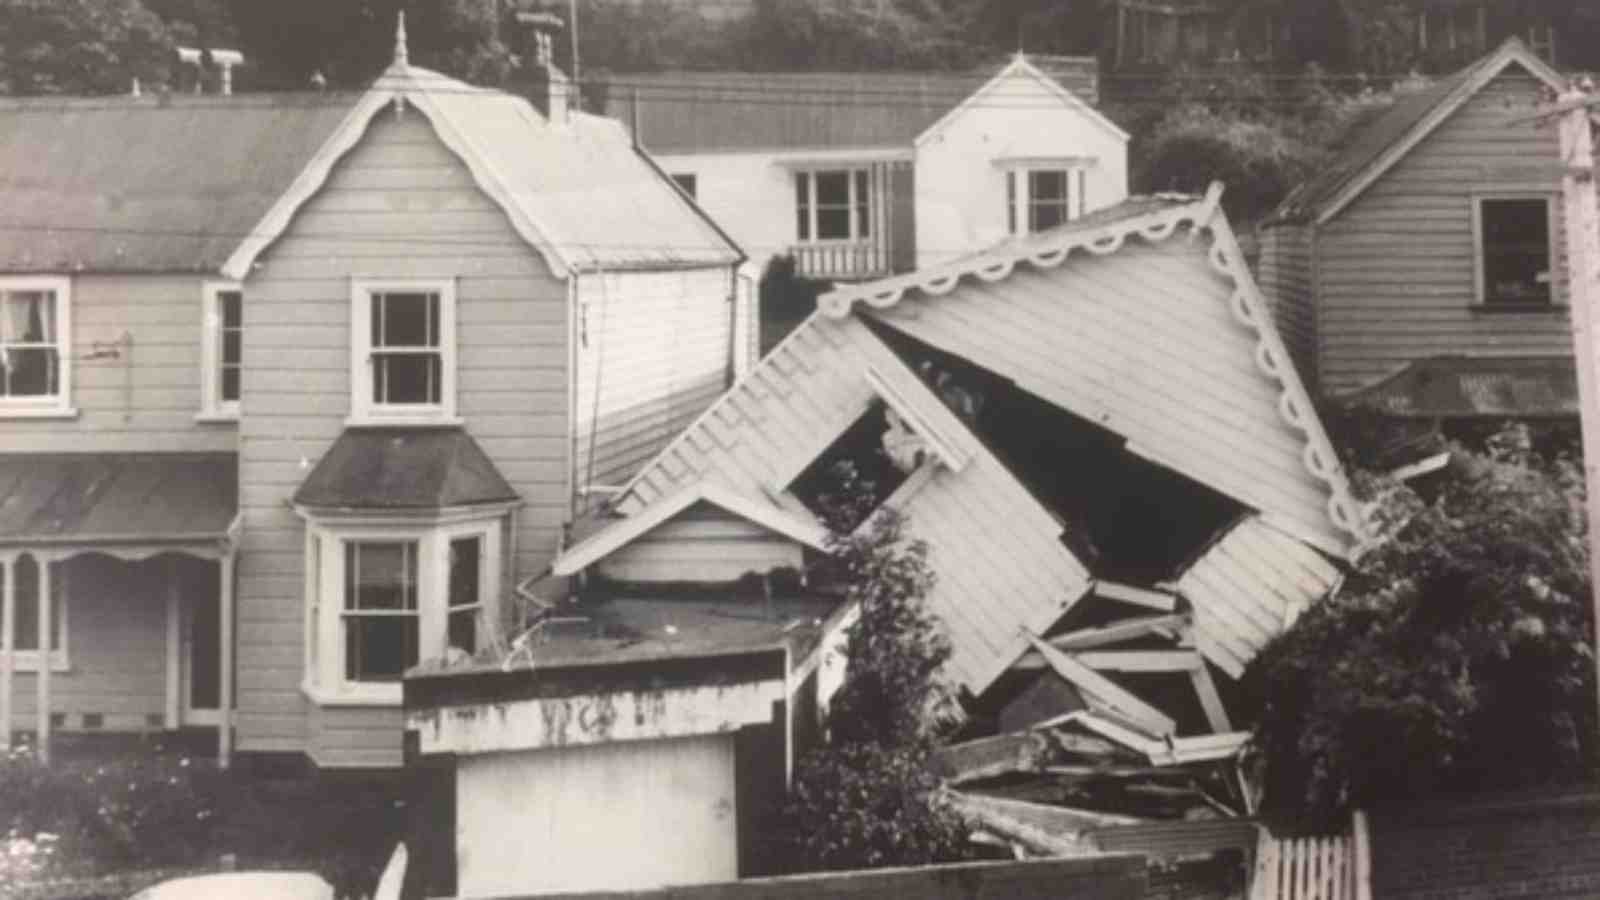 A black and white image of houses in a street, the house on the right has collapsed.